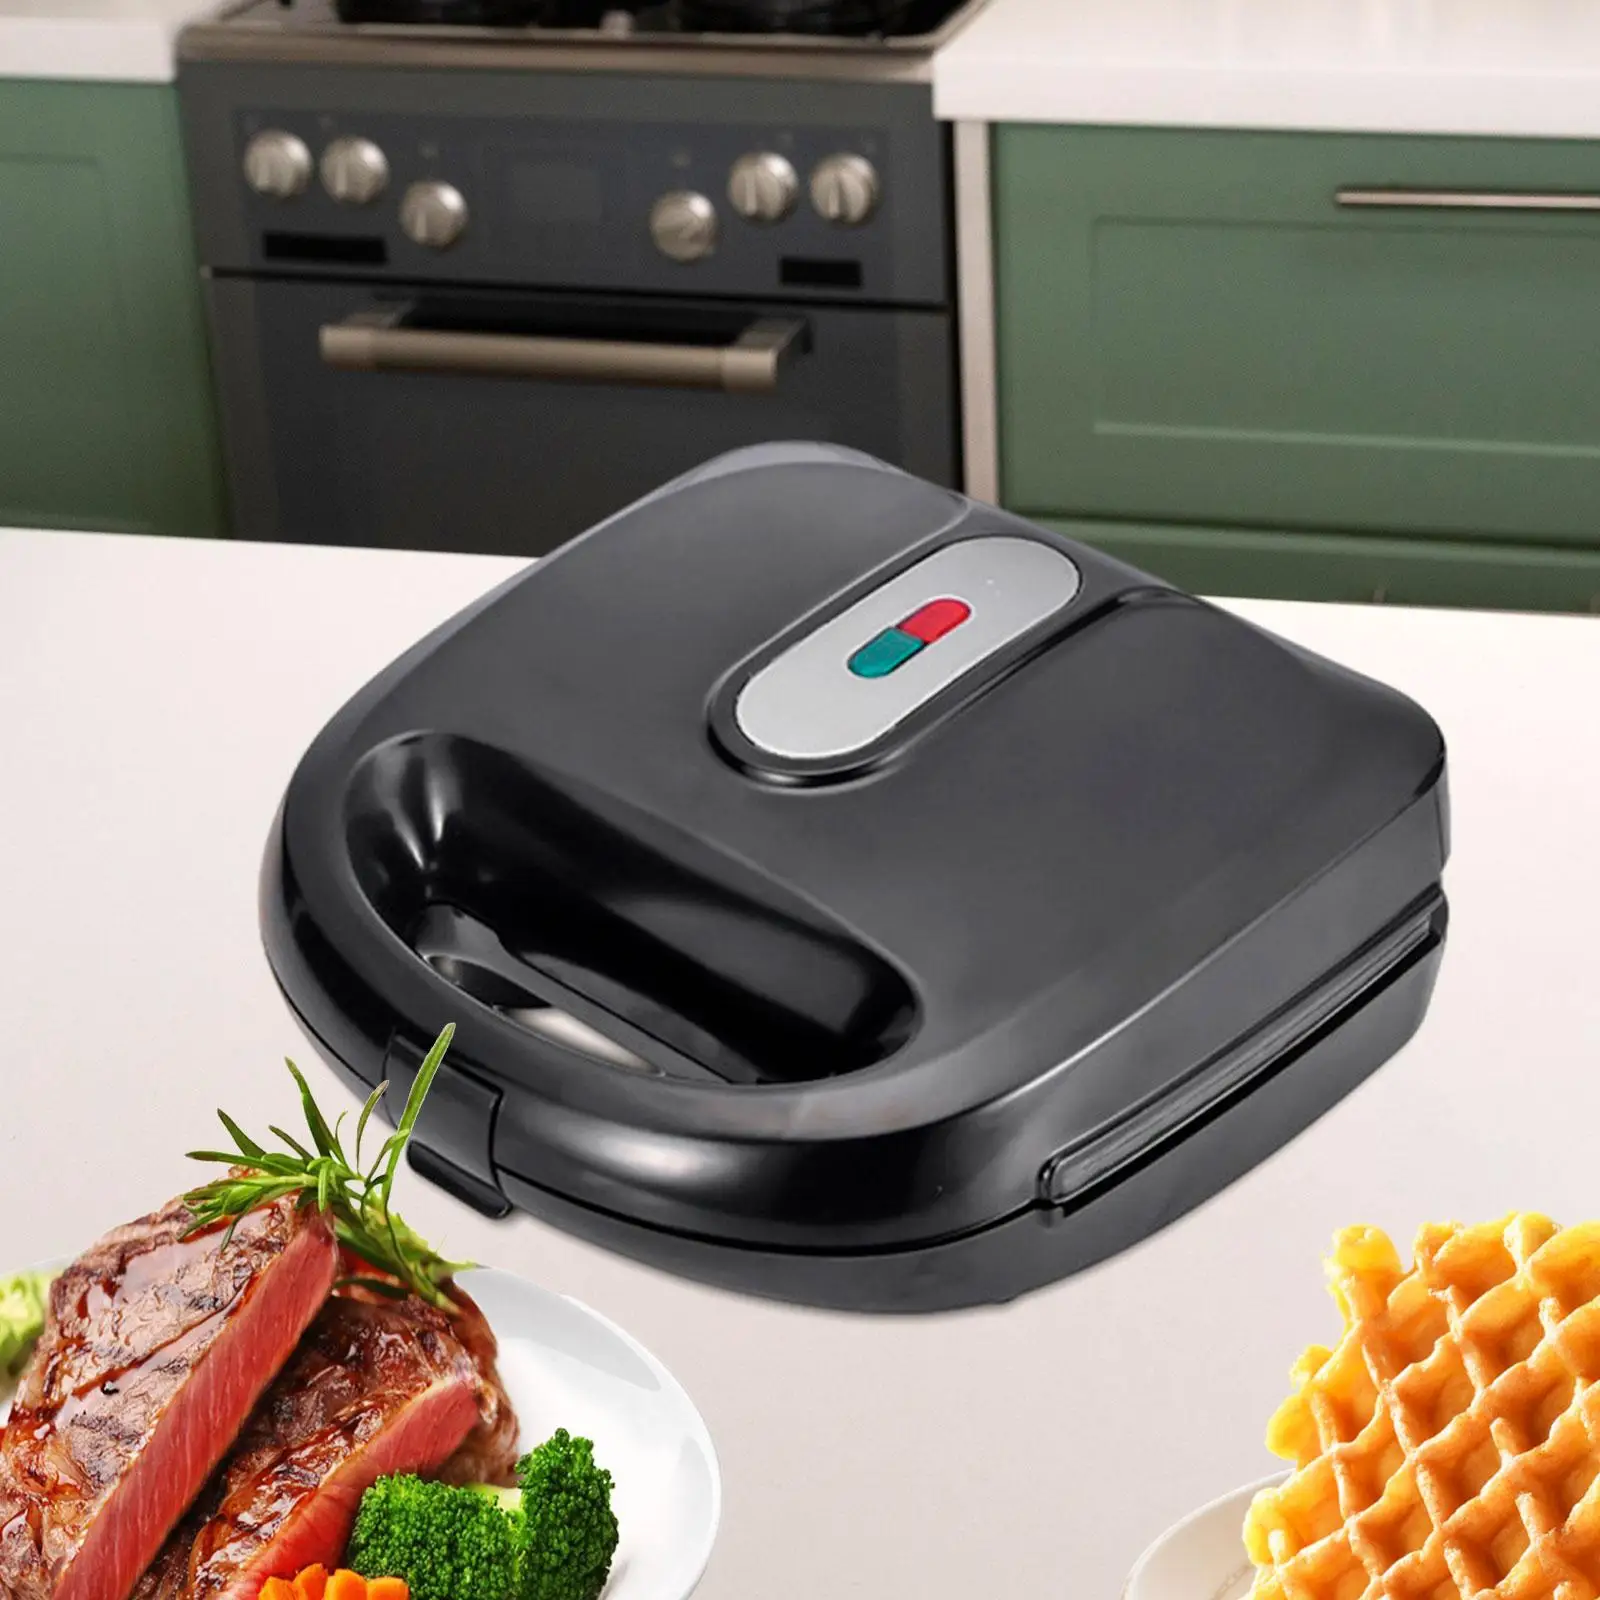 Waffle Makers Anti Skid Feet Compact Handle Breakfast Sandwich Maker for Cheese Breakfast Grilled Sandwiches Burgers